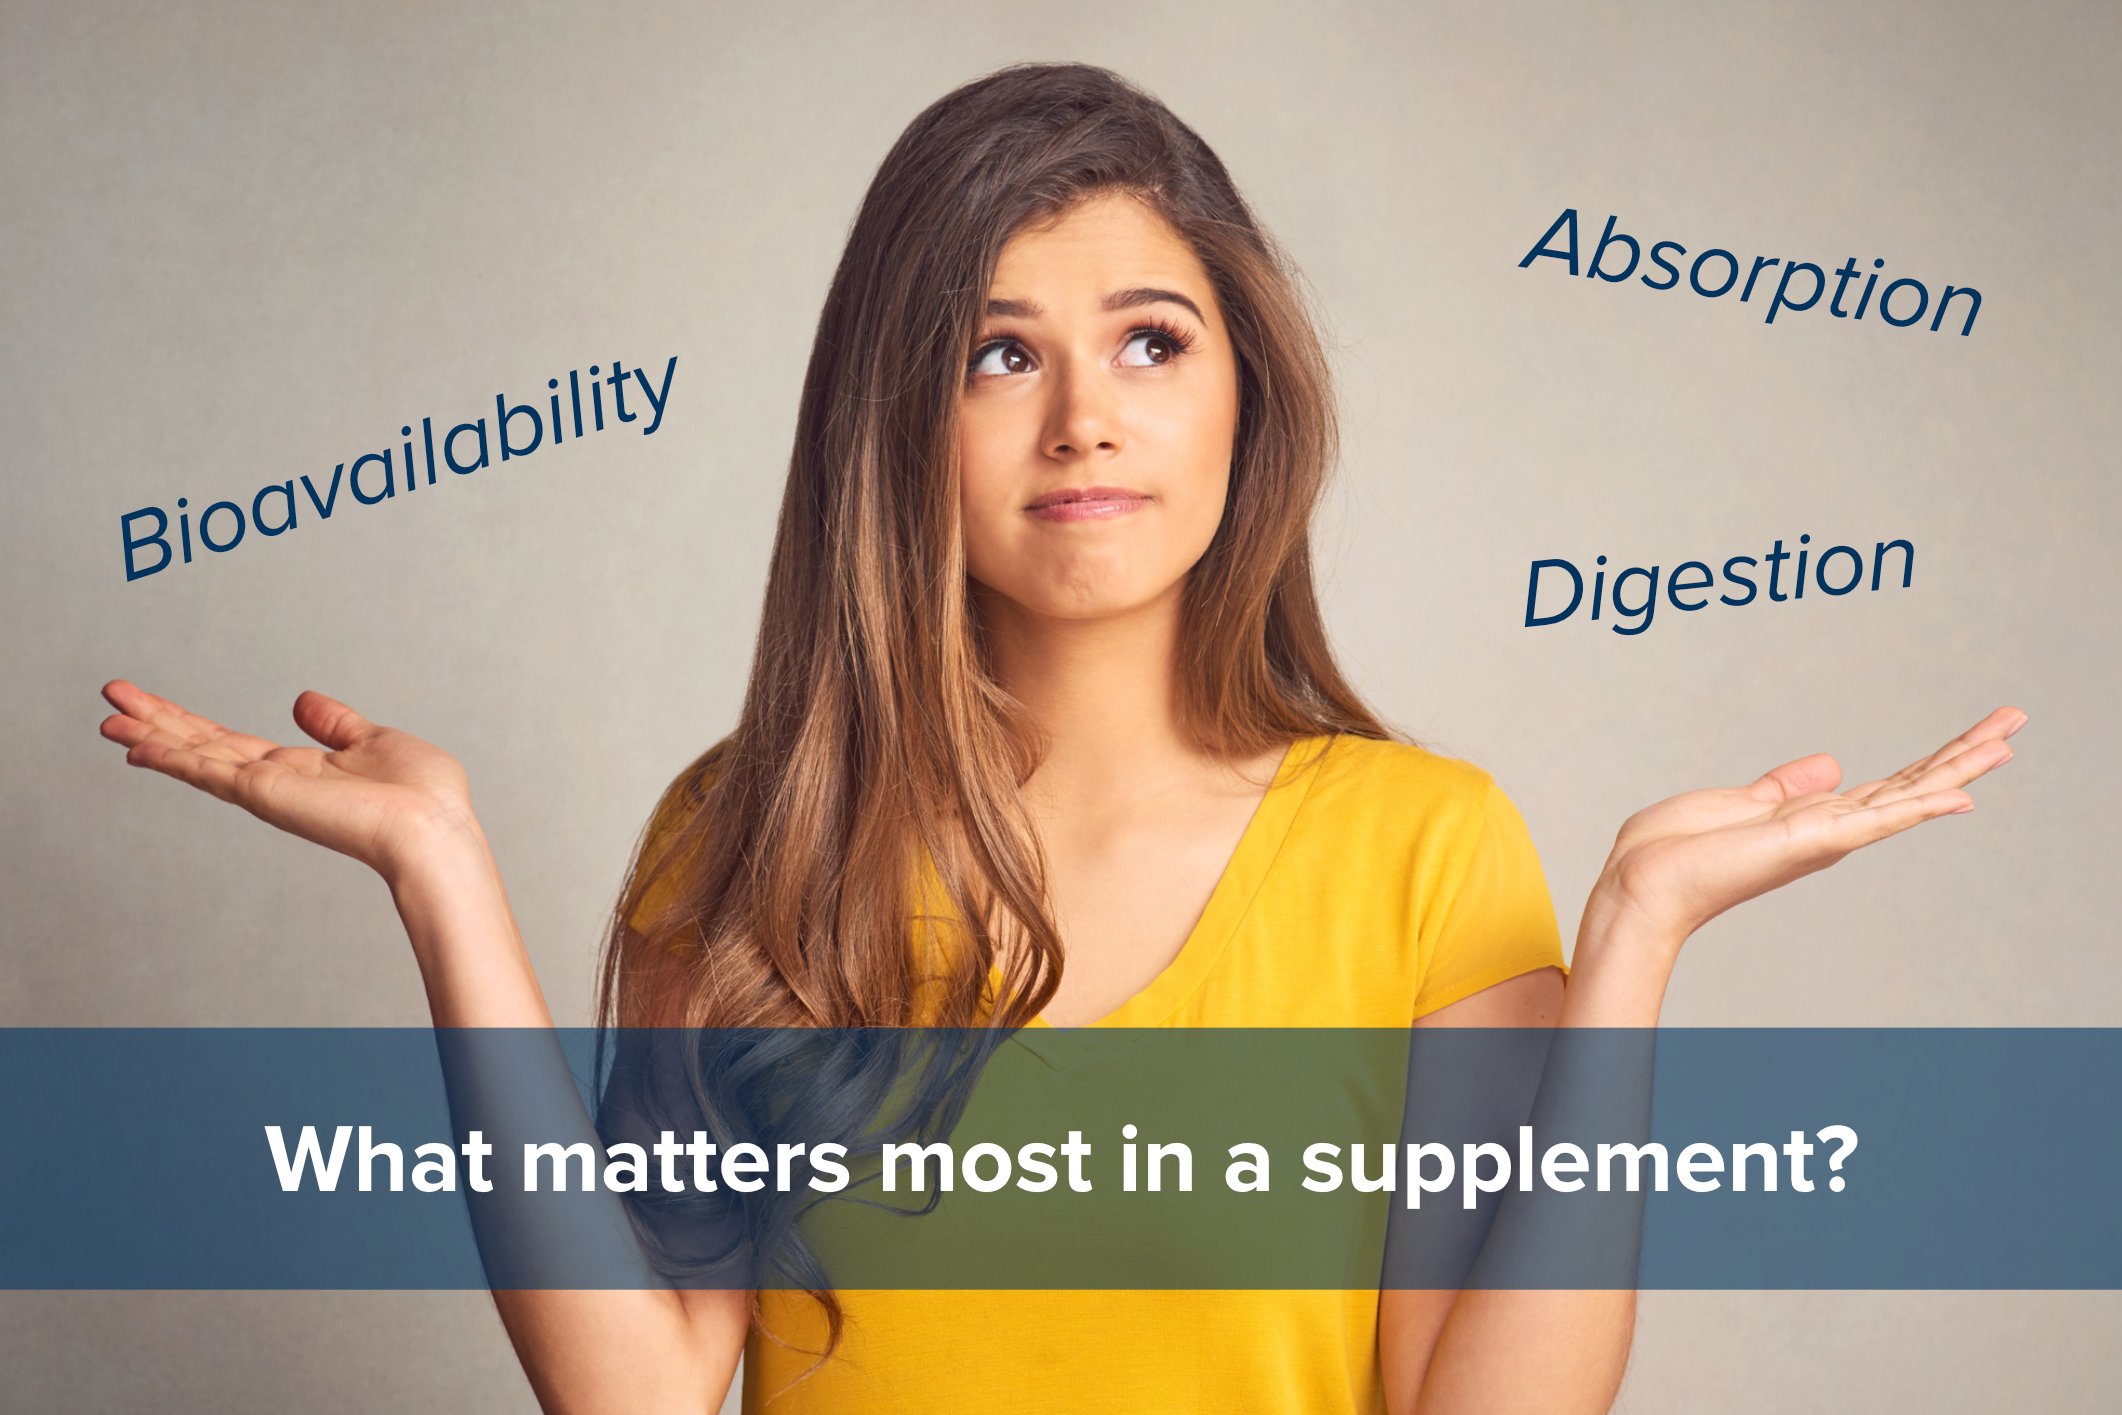 The Most Important Factor When Choosing a Supplement